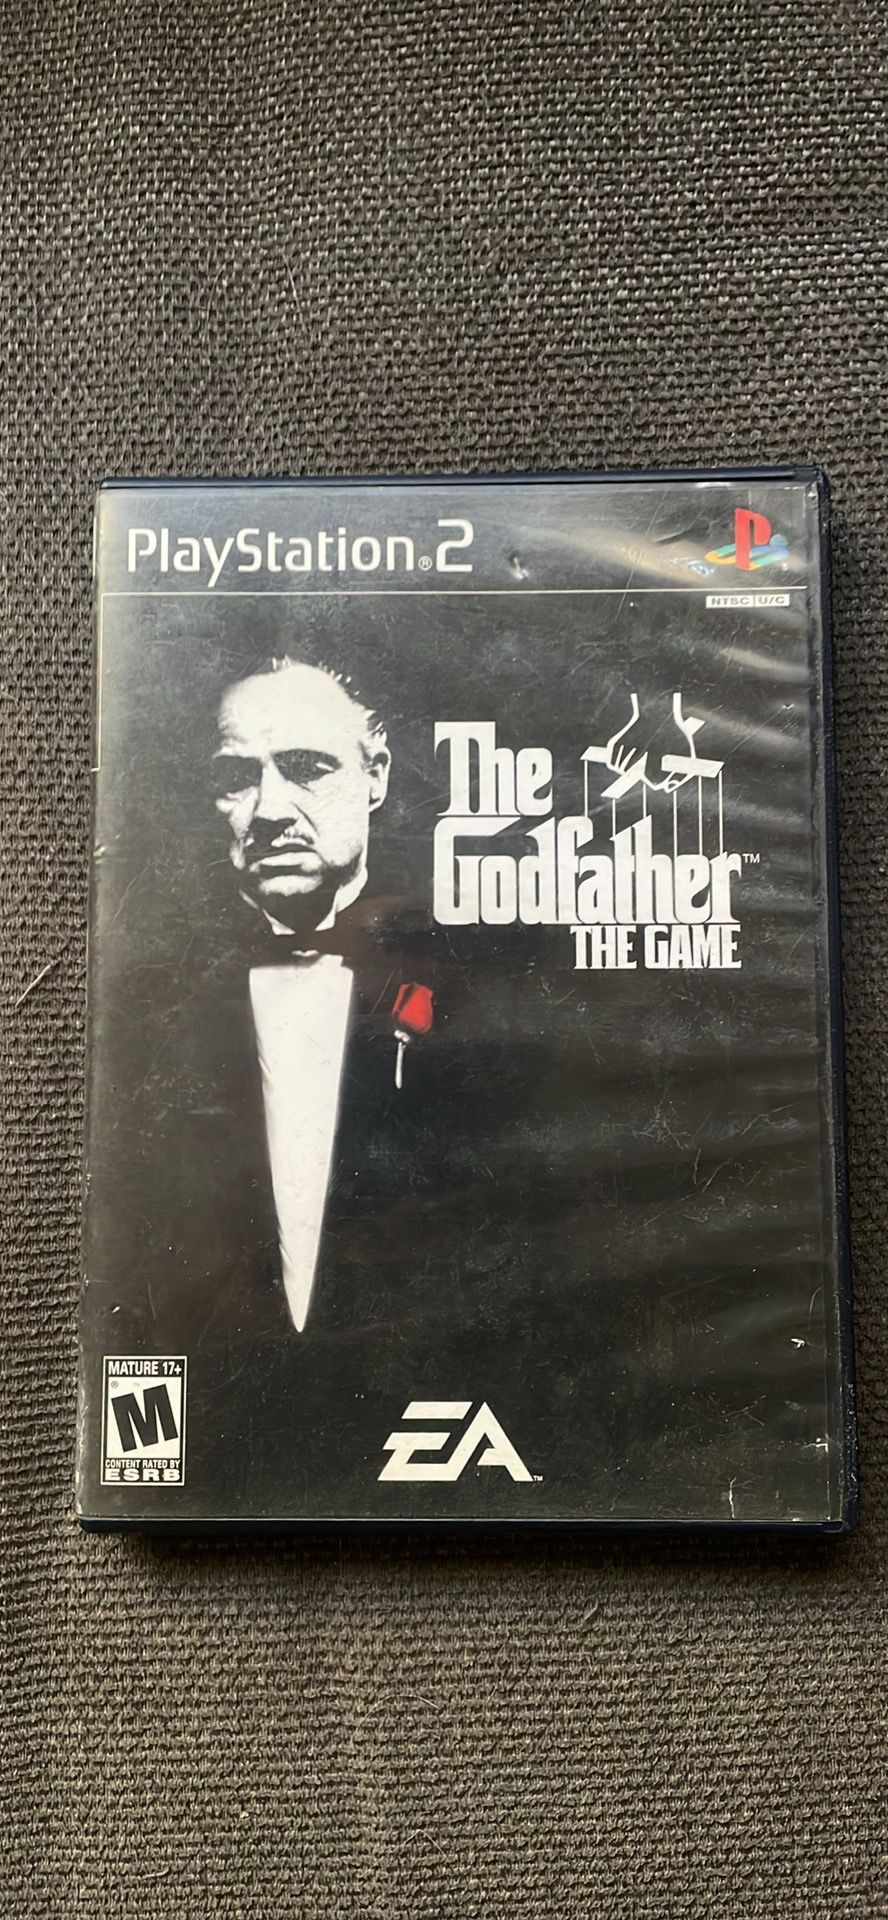 PS2 The Godfather:The Game